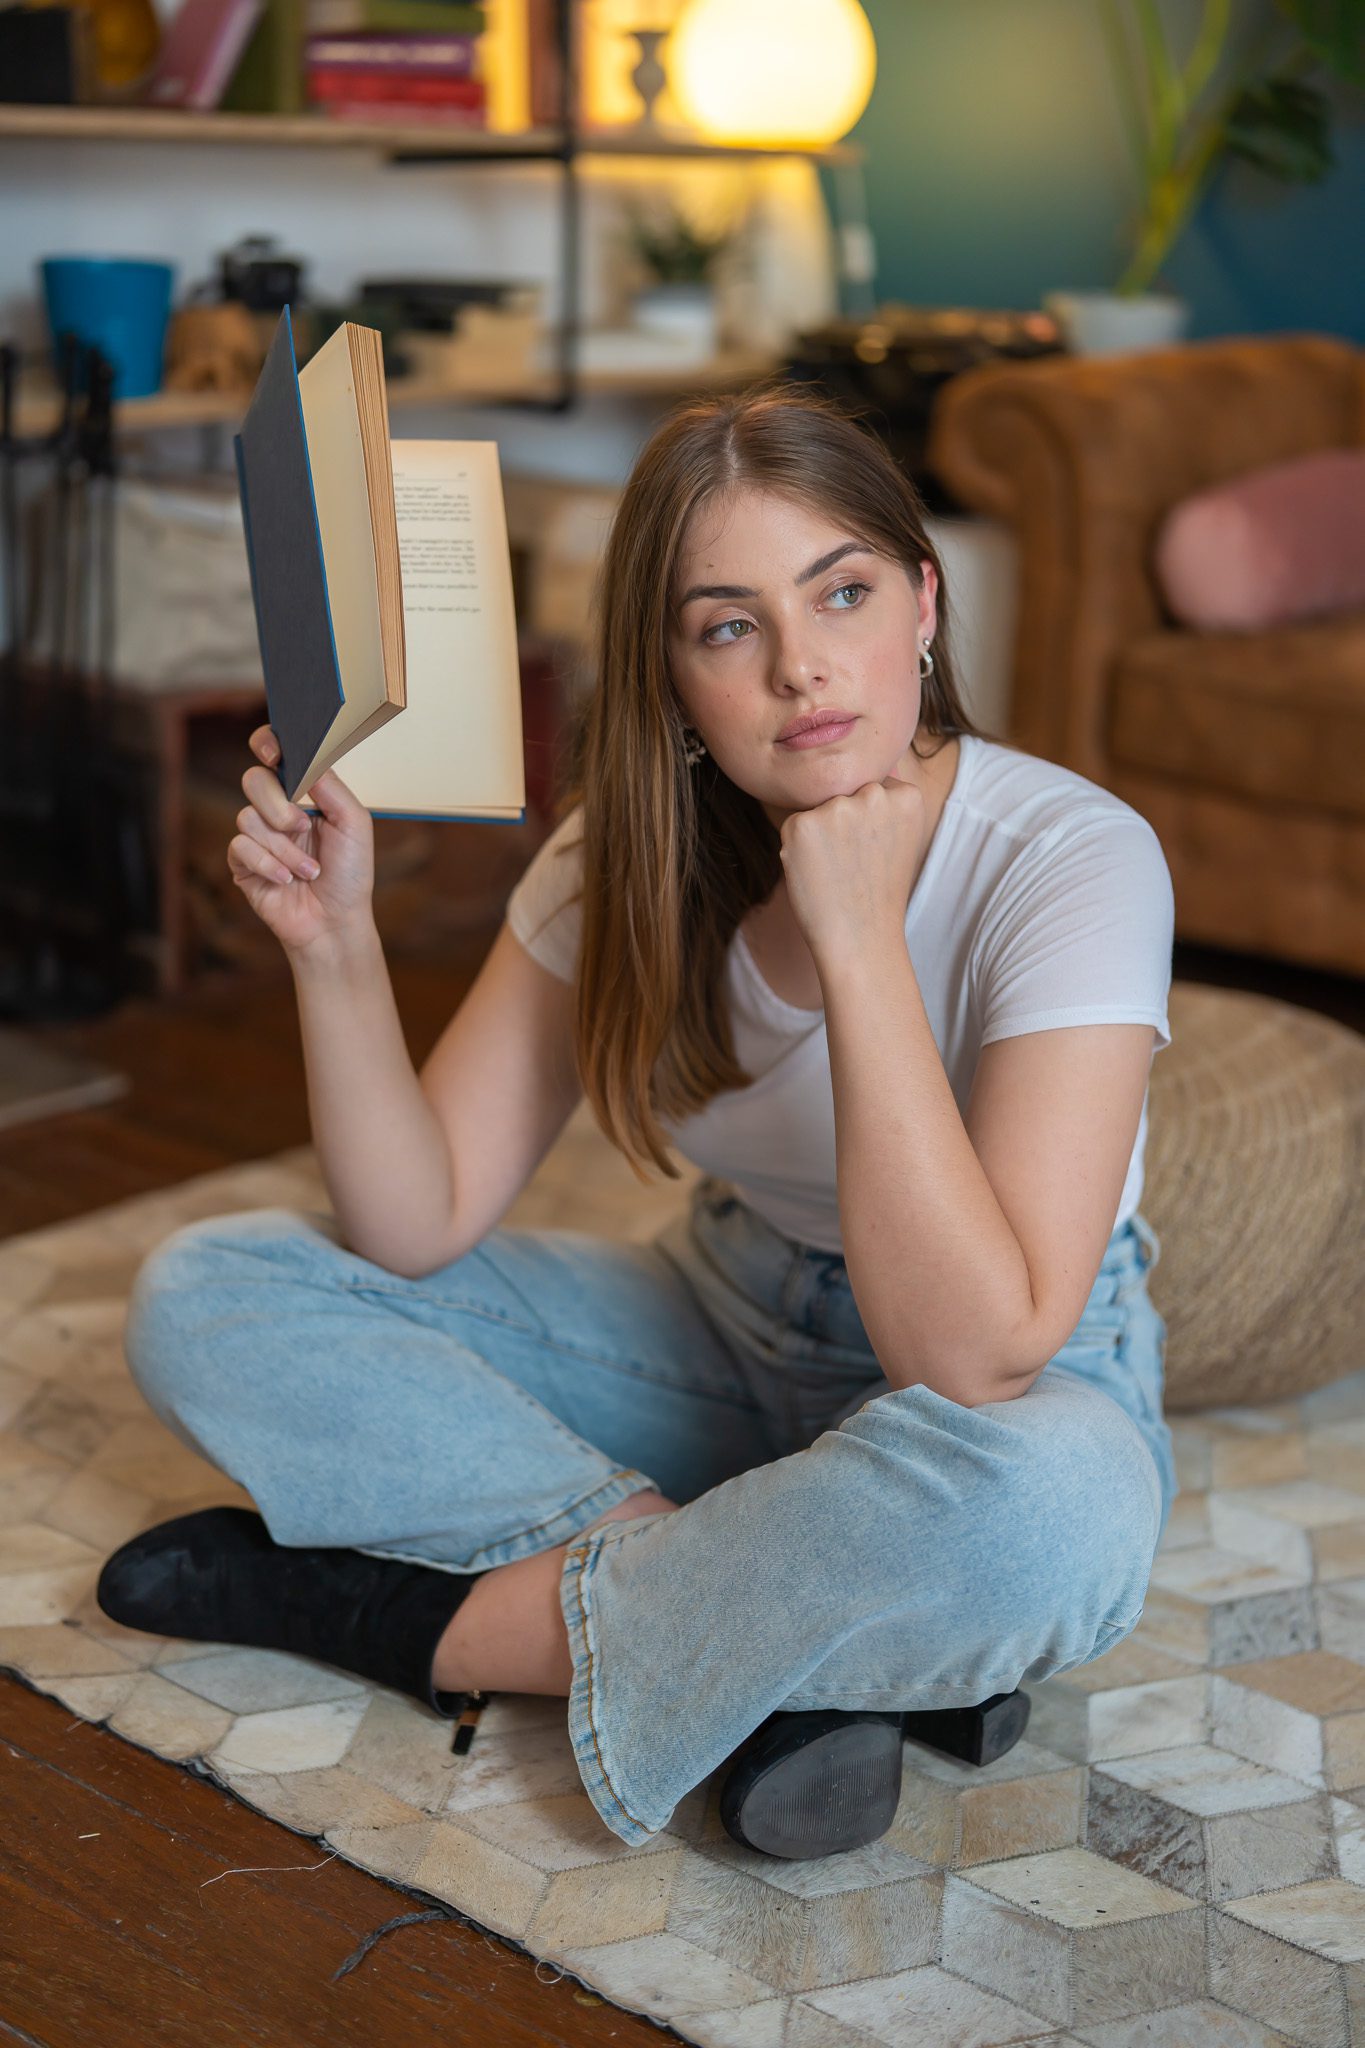 Young model sitting crossed-legged on the floor holding a book in a sitting room setting wearing a white t-shirt and jeans as she is photographed by Georgie Greene Photography for the portraits webpage